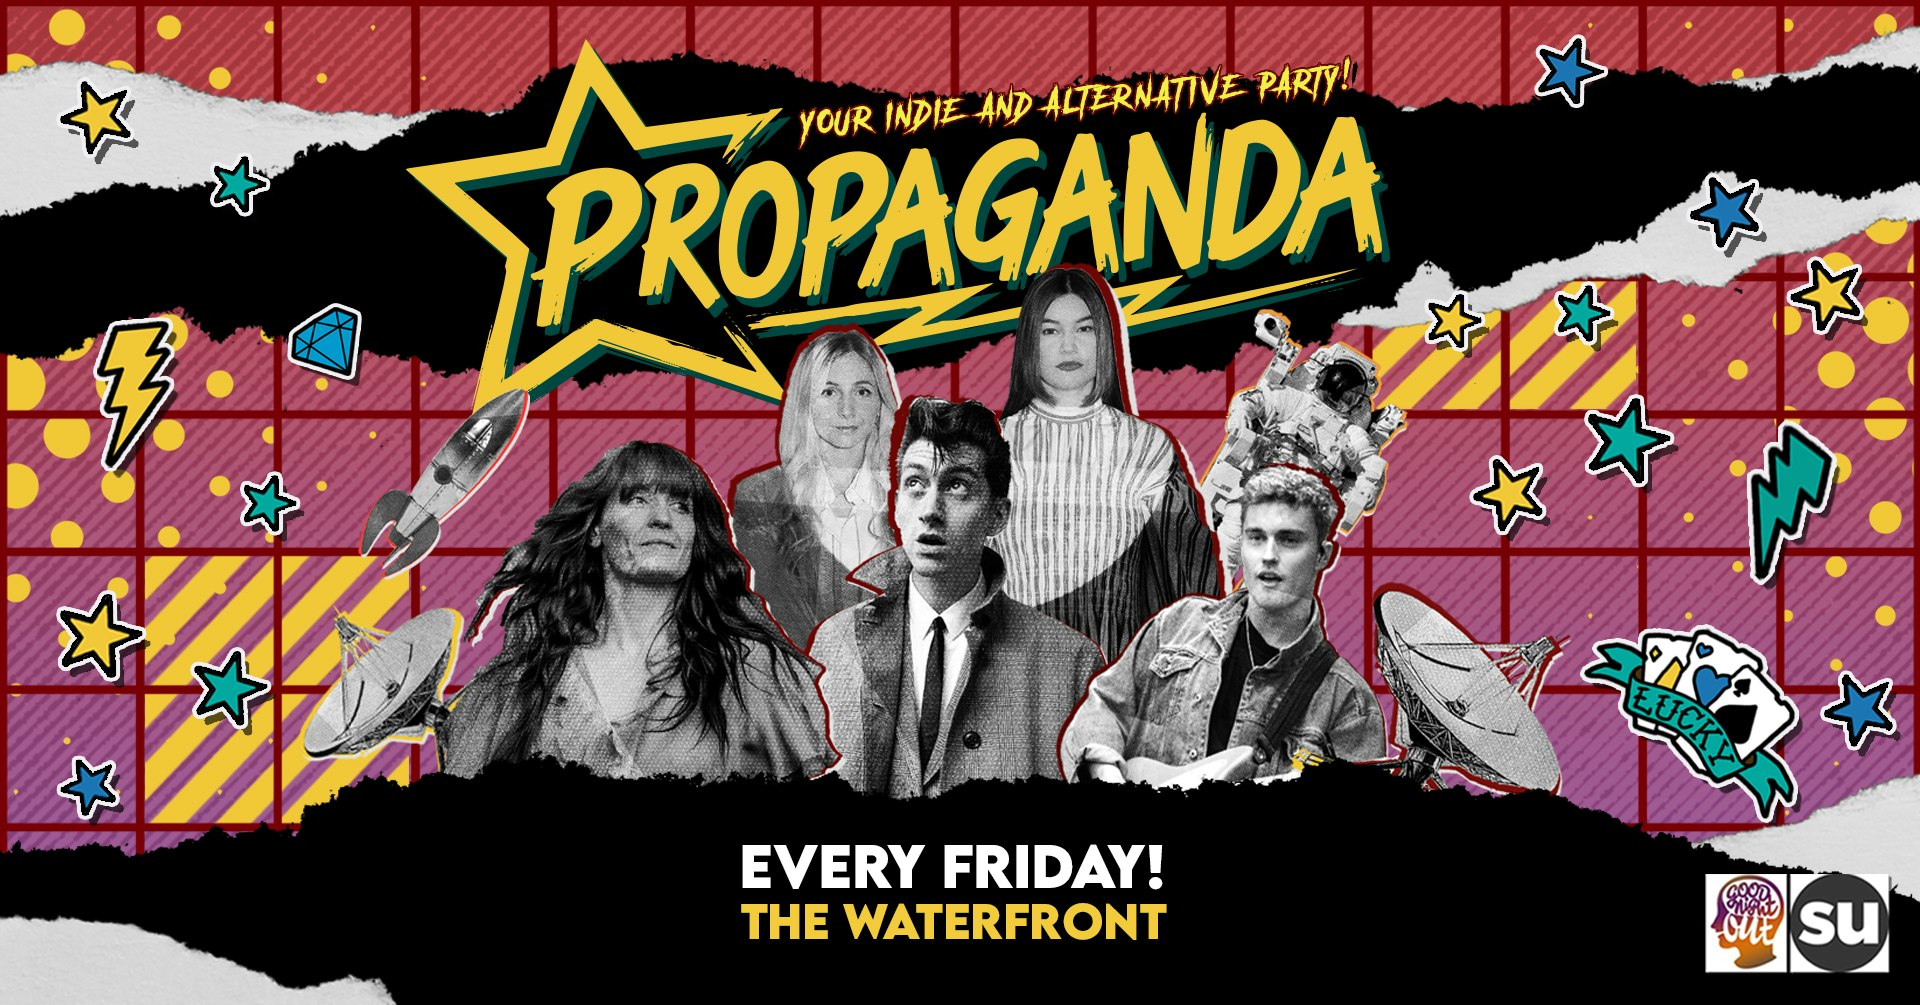 TONIGHT! Propaganda Norwich – FREE shot for 1st 100 in – Your indie + Alt Party – The Waterfront!